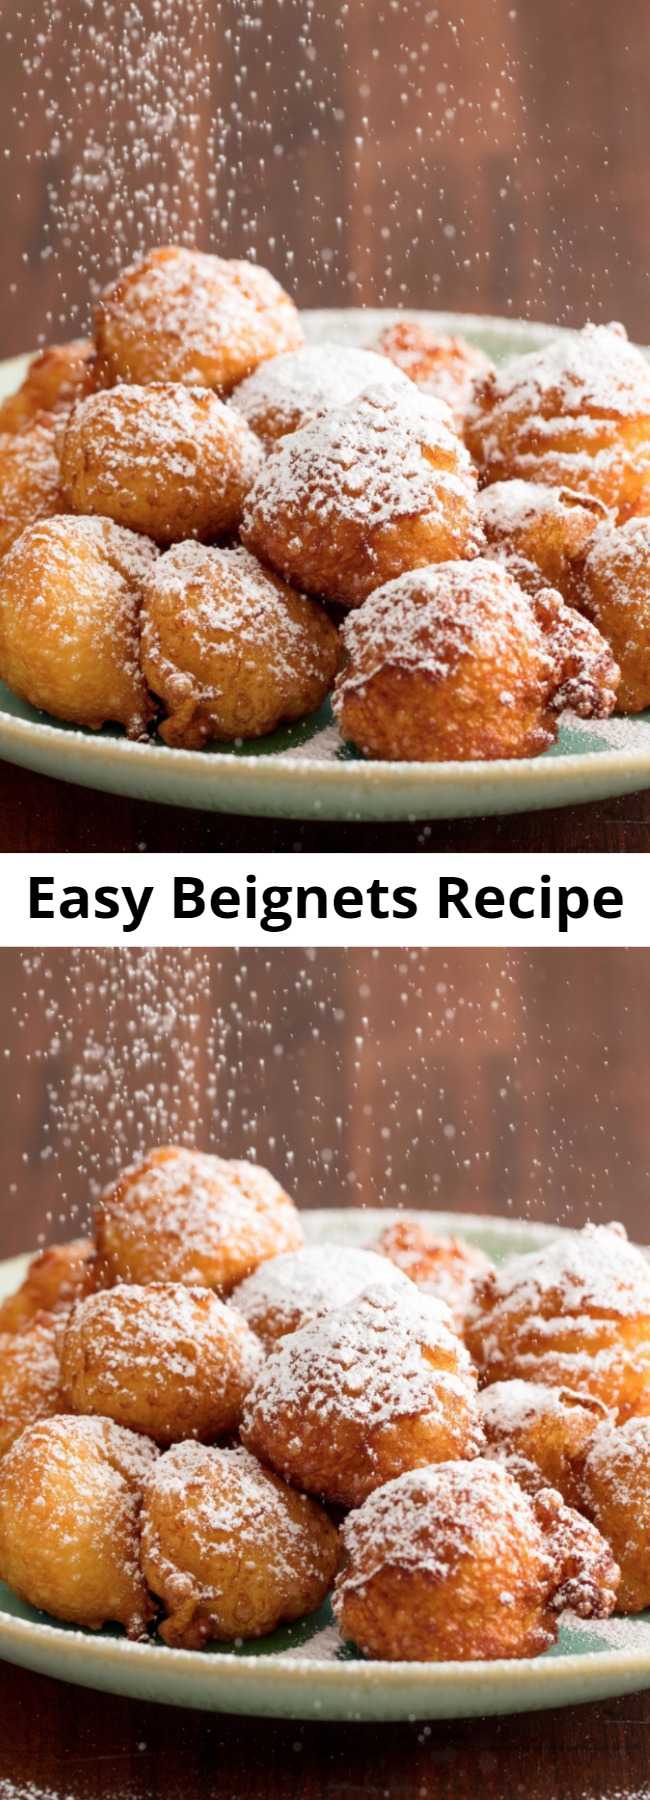 Easy Beignets Recipe - You've probably heard of beignets before because of the long lines that they draw in New Orleans. The pillow-like fried treats covered in powdered sugar are worth the trip to New Orleans alone. This easy recipe let's you skip the lines and have them at home. They have a simple batter that fries up in just a few minutes. What could be better? #easy #recipe #beignets #neworleans #cafedumonde #fry #vanilla #fried